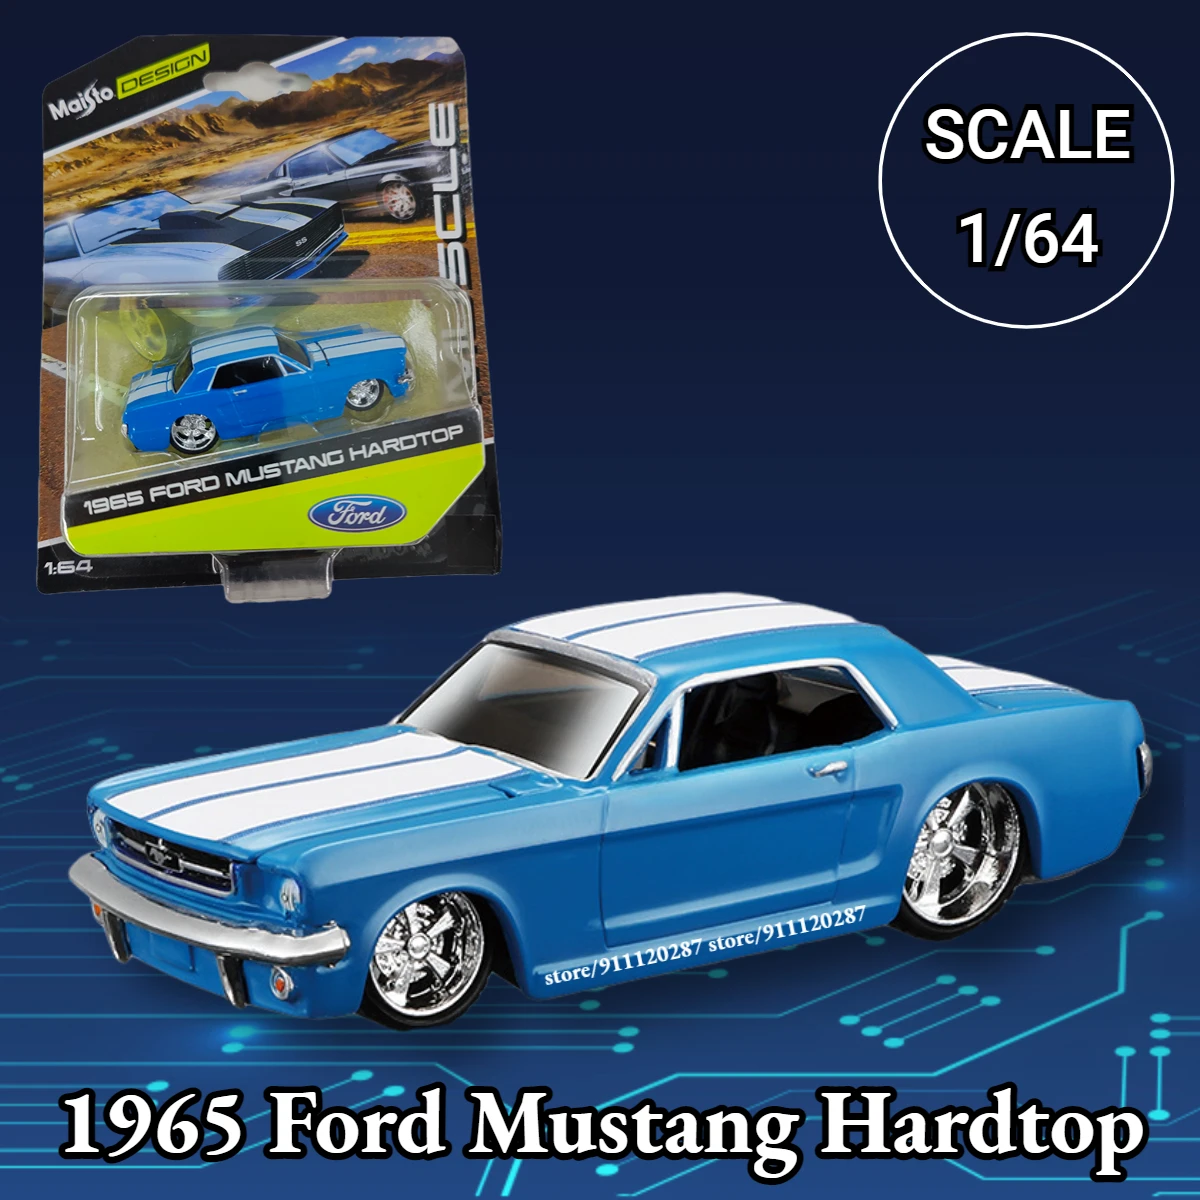 

Maisto 1/64 Vintage Mini Car Model, 1965 Ford Mustang Hardtop Miniature Scale Metal Diecast Vehicle Replica Collection Toy